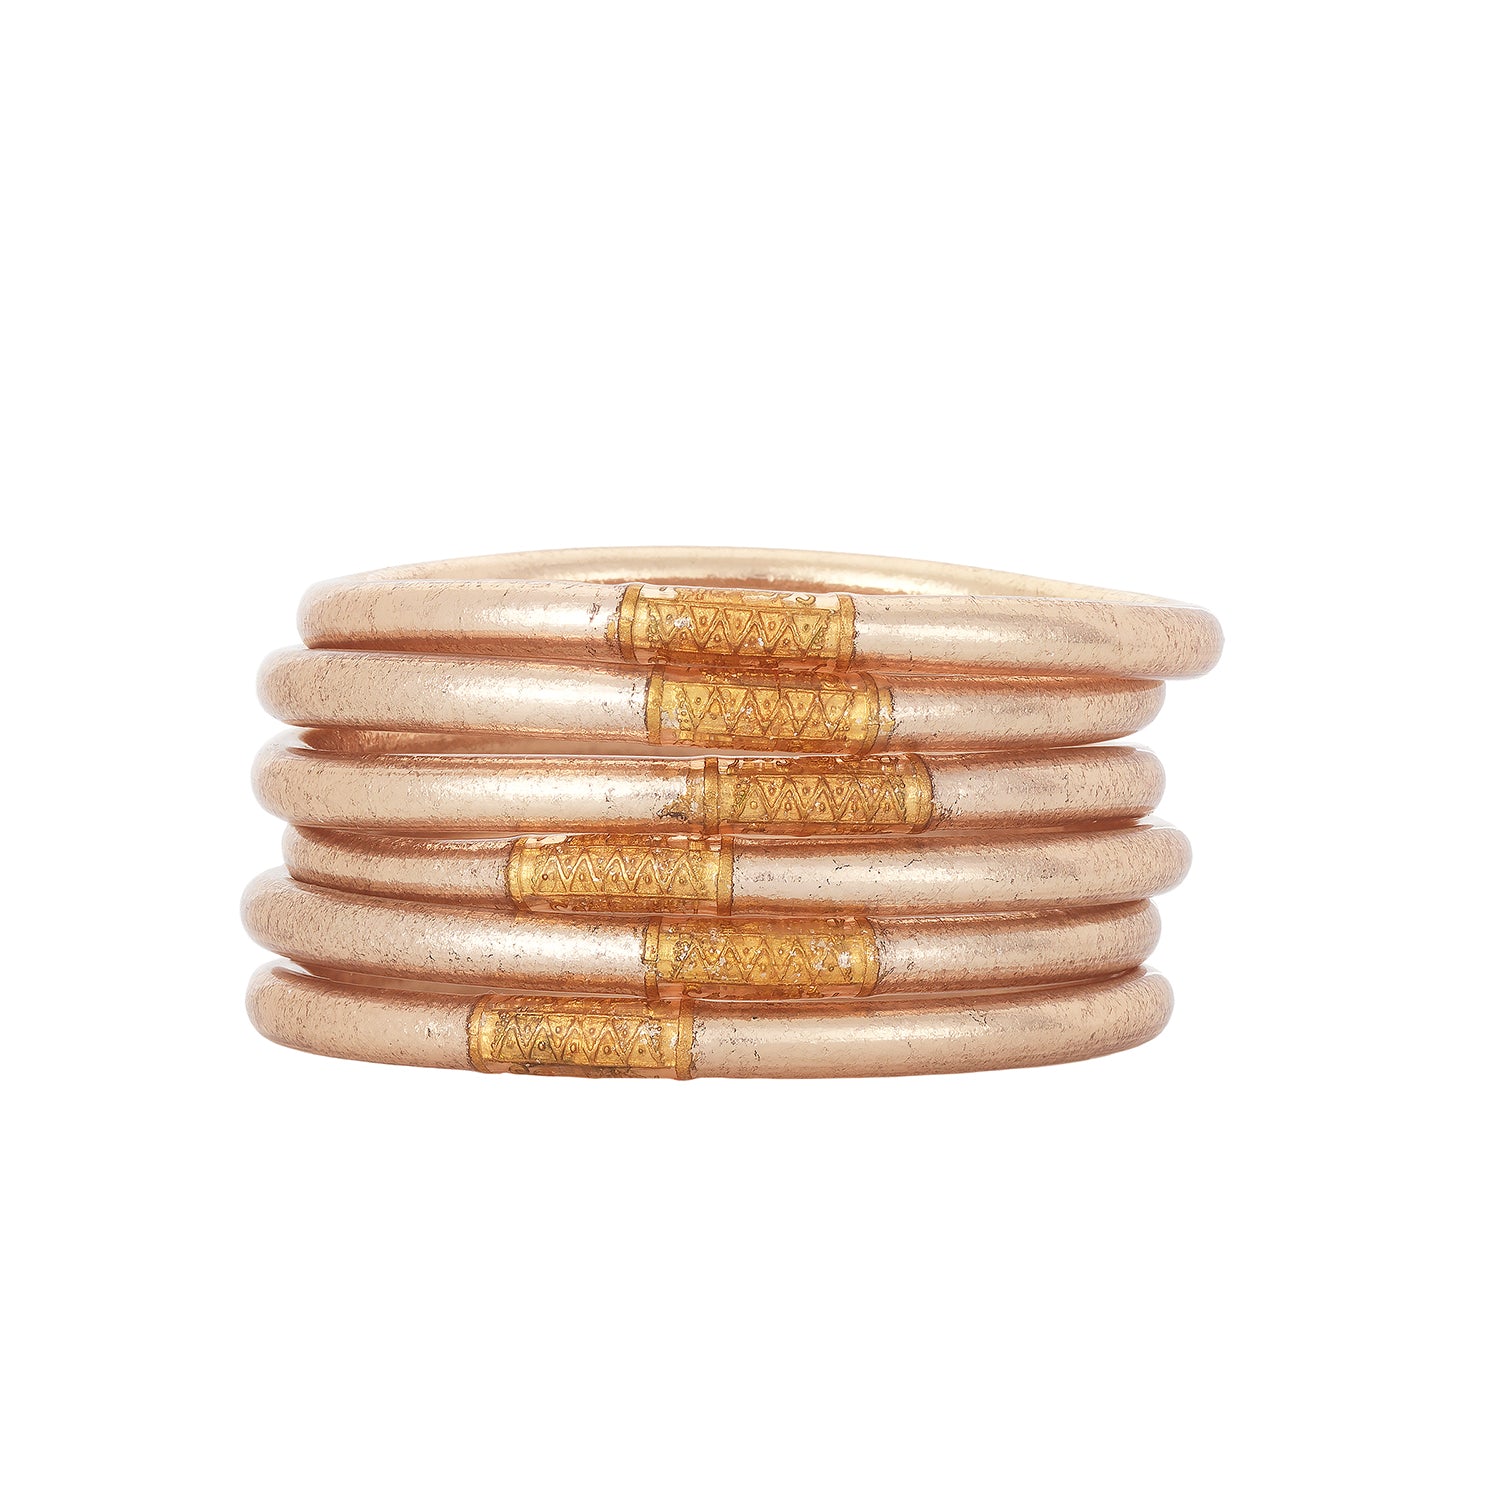 The BuDhaGirl Champagne All Weather Bangles® are here!!! Six orbs filled with divine gold leaf custom blended exclusively for BuDhaGirl. These Champagne AWB® have the same amazing qualities that have made them become the modern woman's go-to jewelry of choice... Set of 6 bangles.